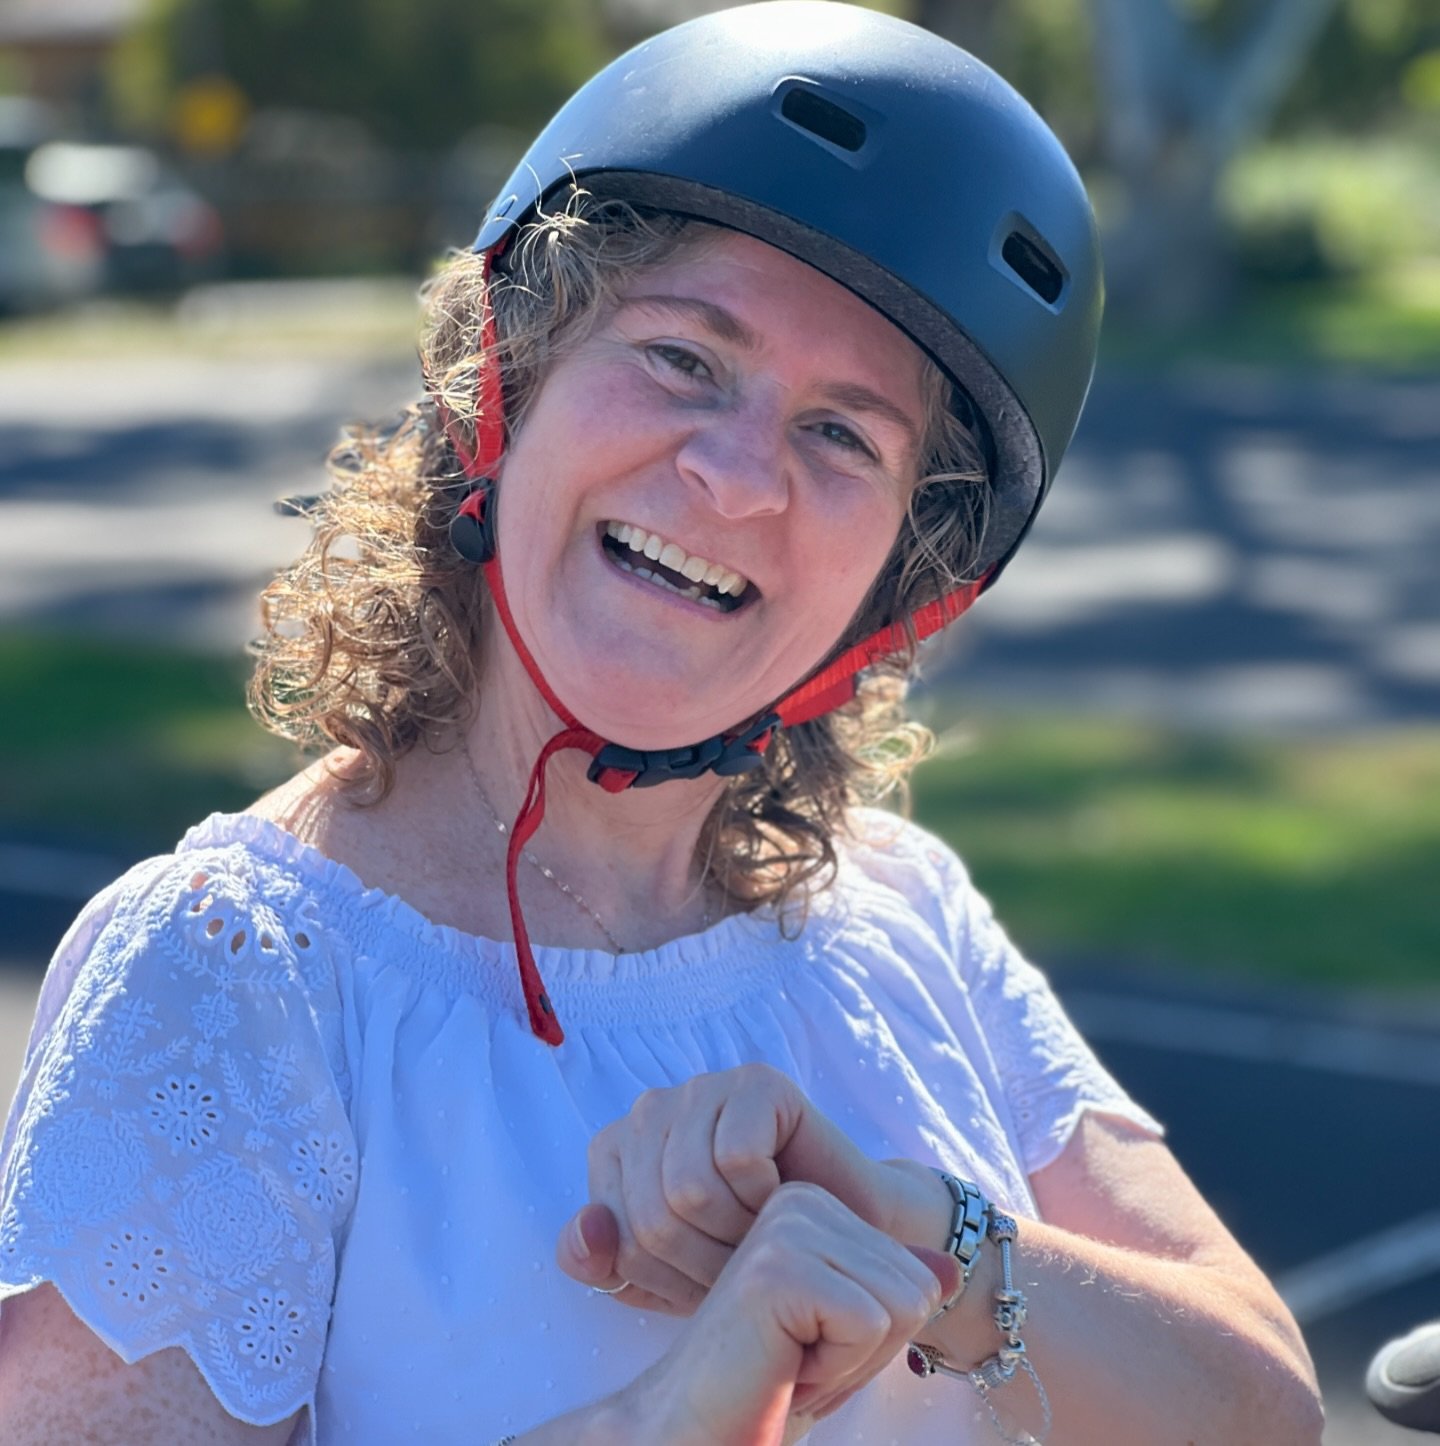 The thrill of the first ride! There&rsquo;s nothing quite like the joy of conquering something new&hellip;.. especially when it opens up new opportunities. Welcome to the wonderful world of bike riding&mdash; Mary along with her sister was up and ped